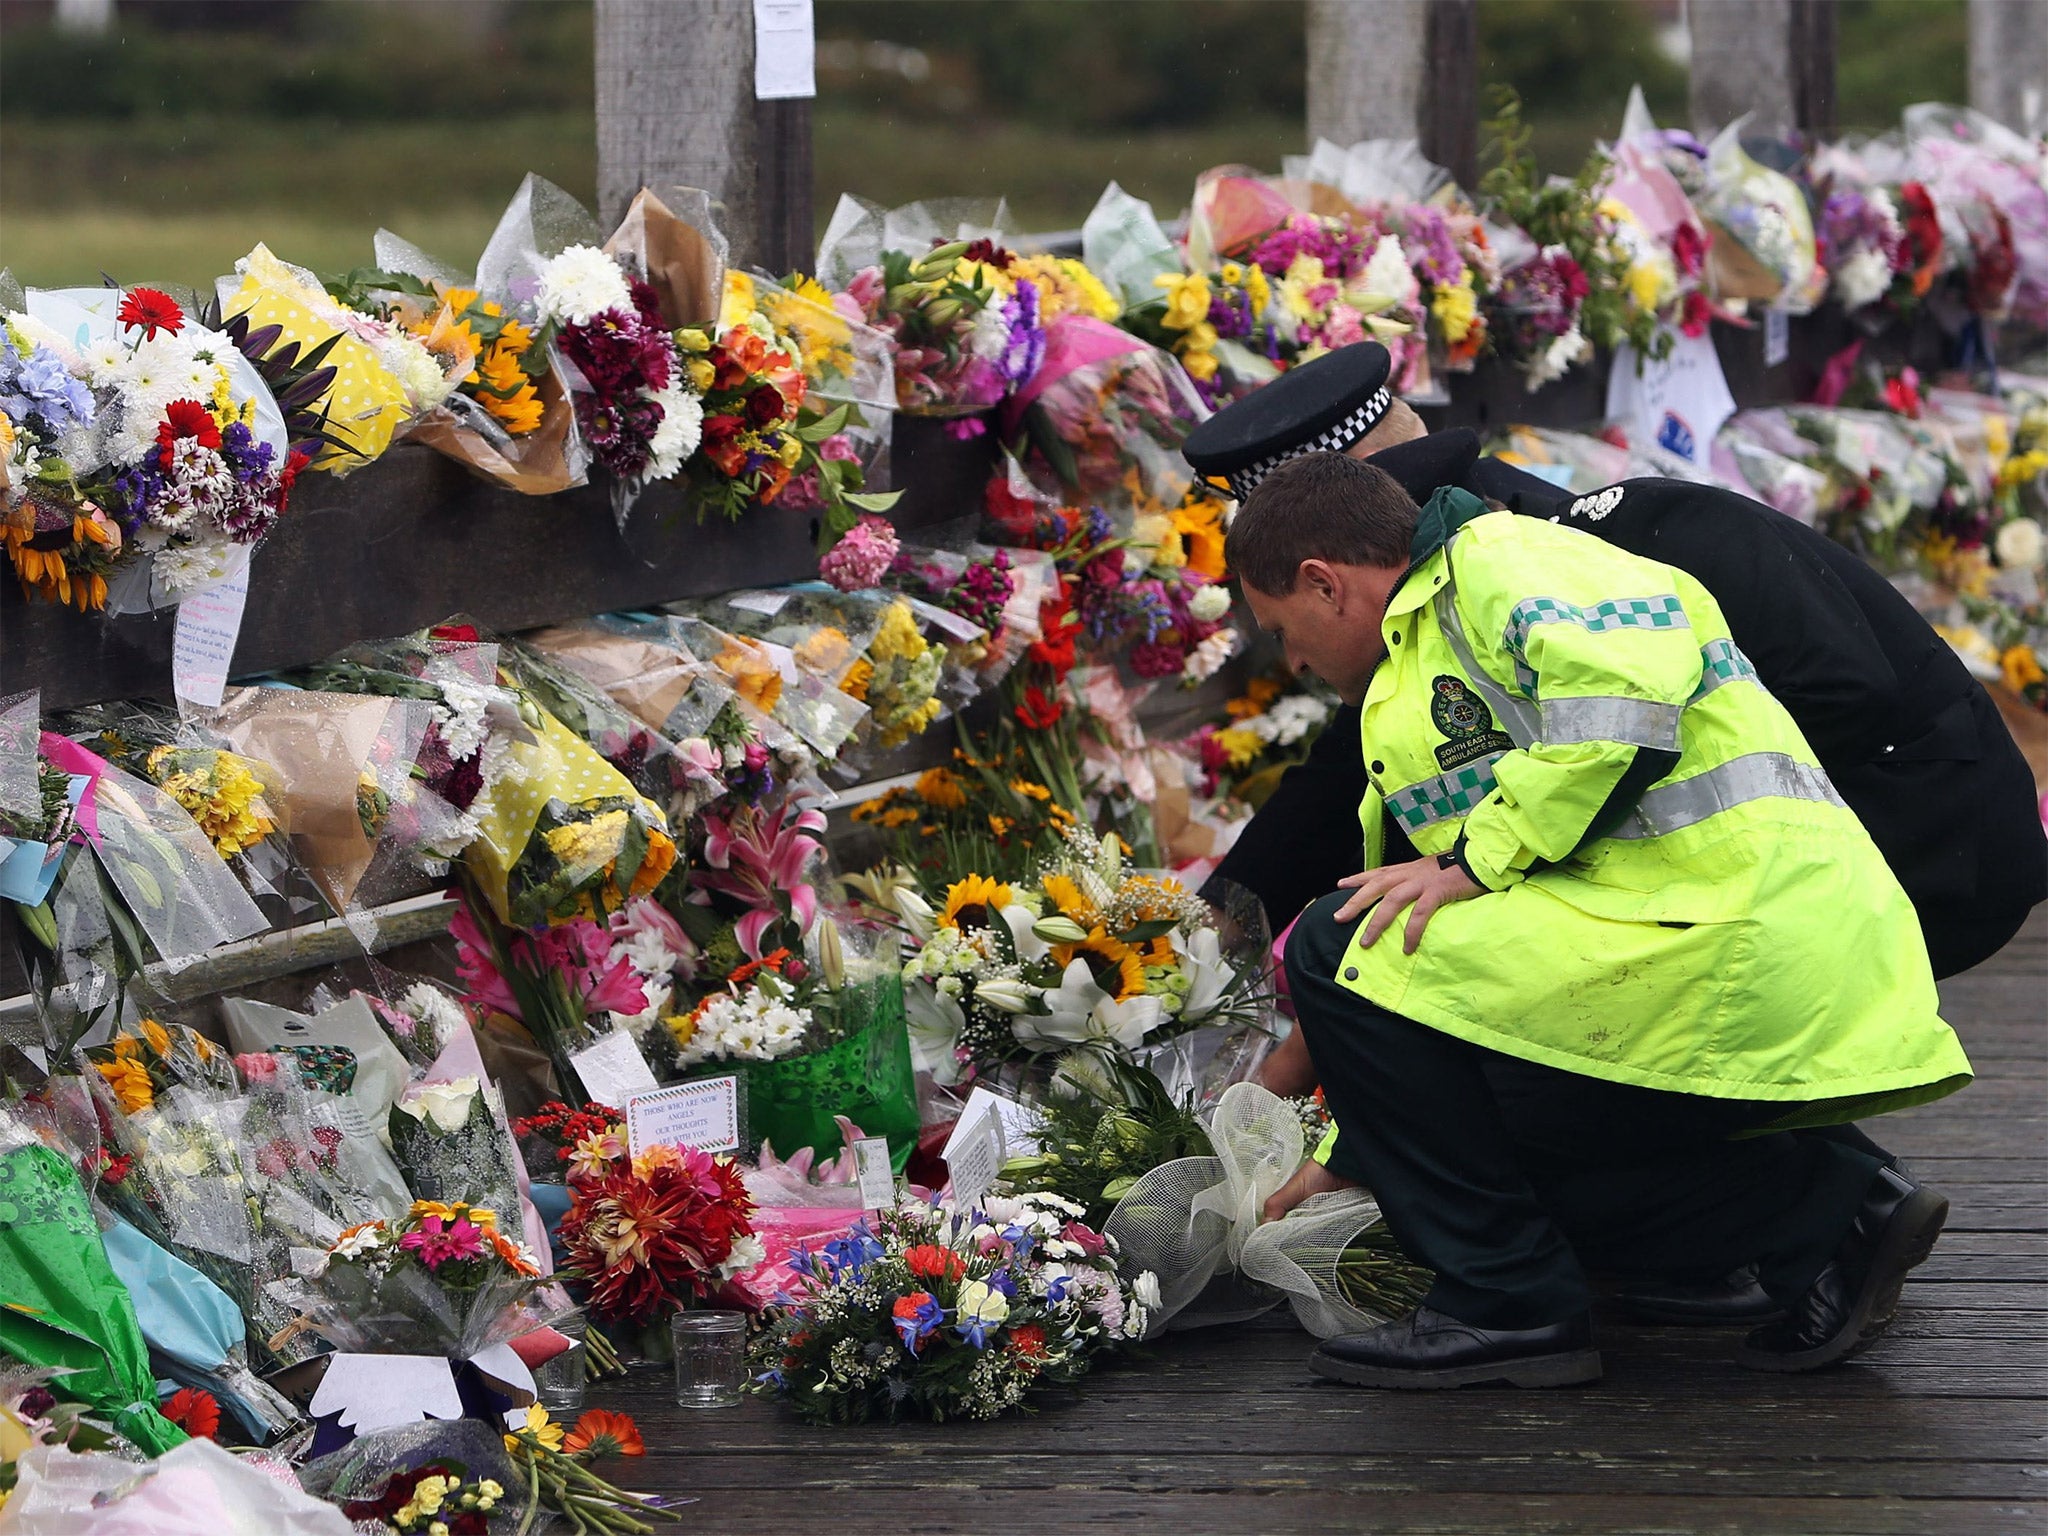 Floral tributes are left by representatives of the emergency services, close to the scene of the disaster